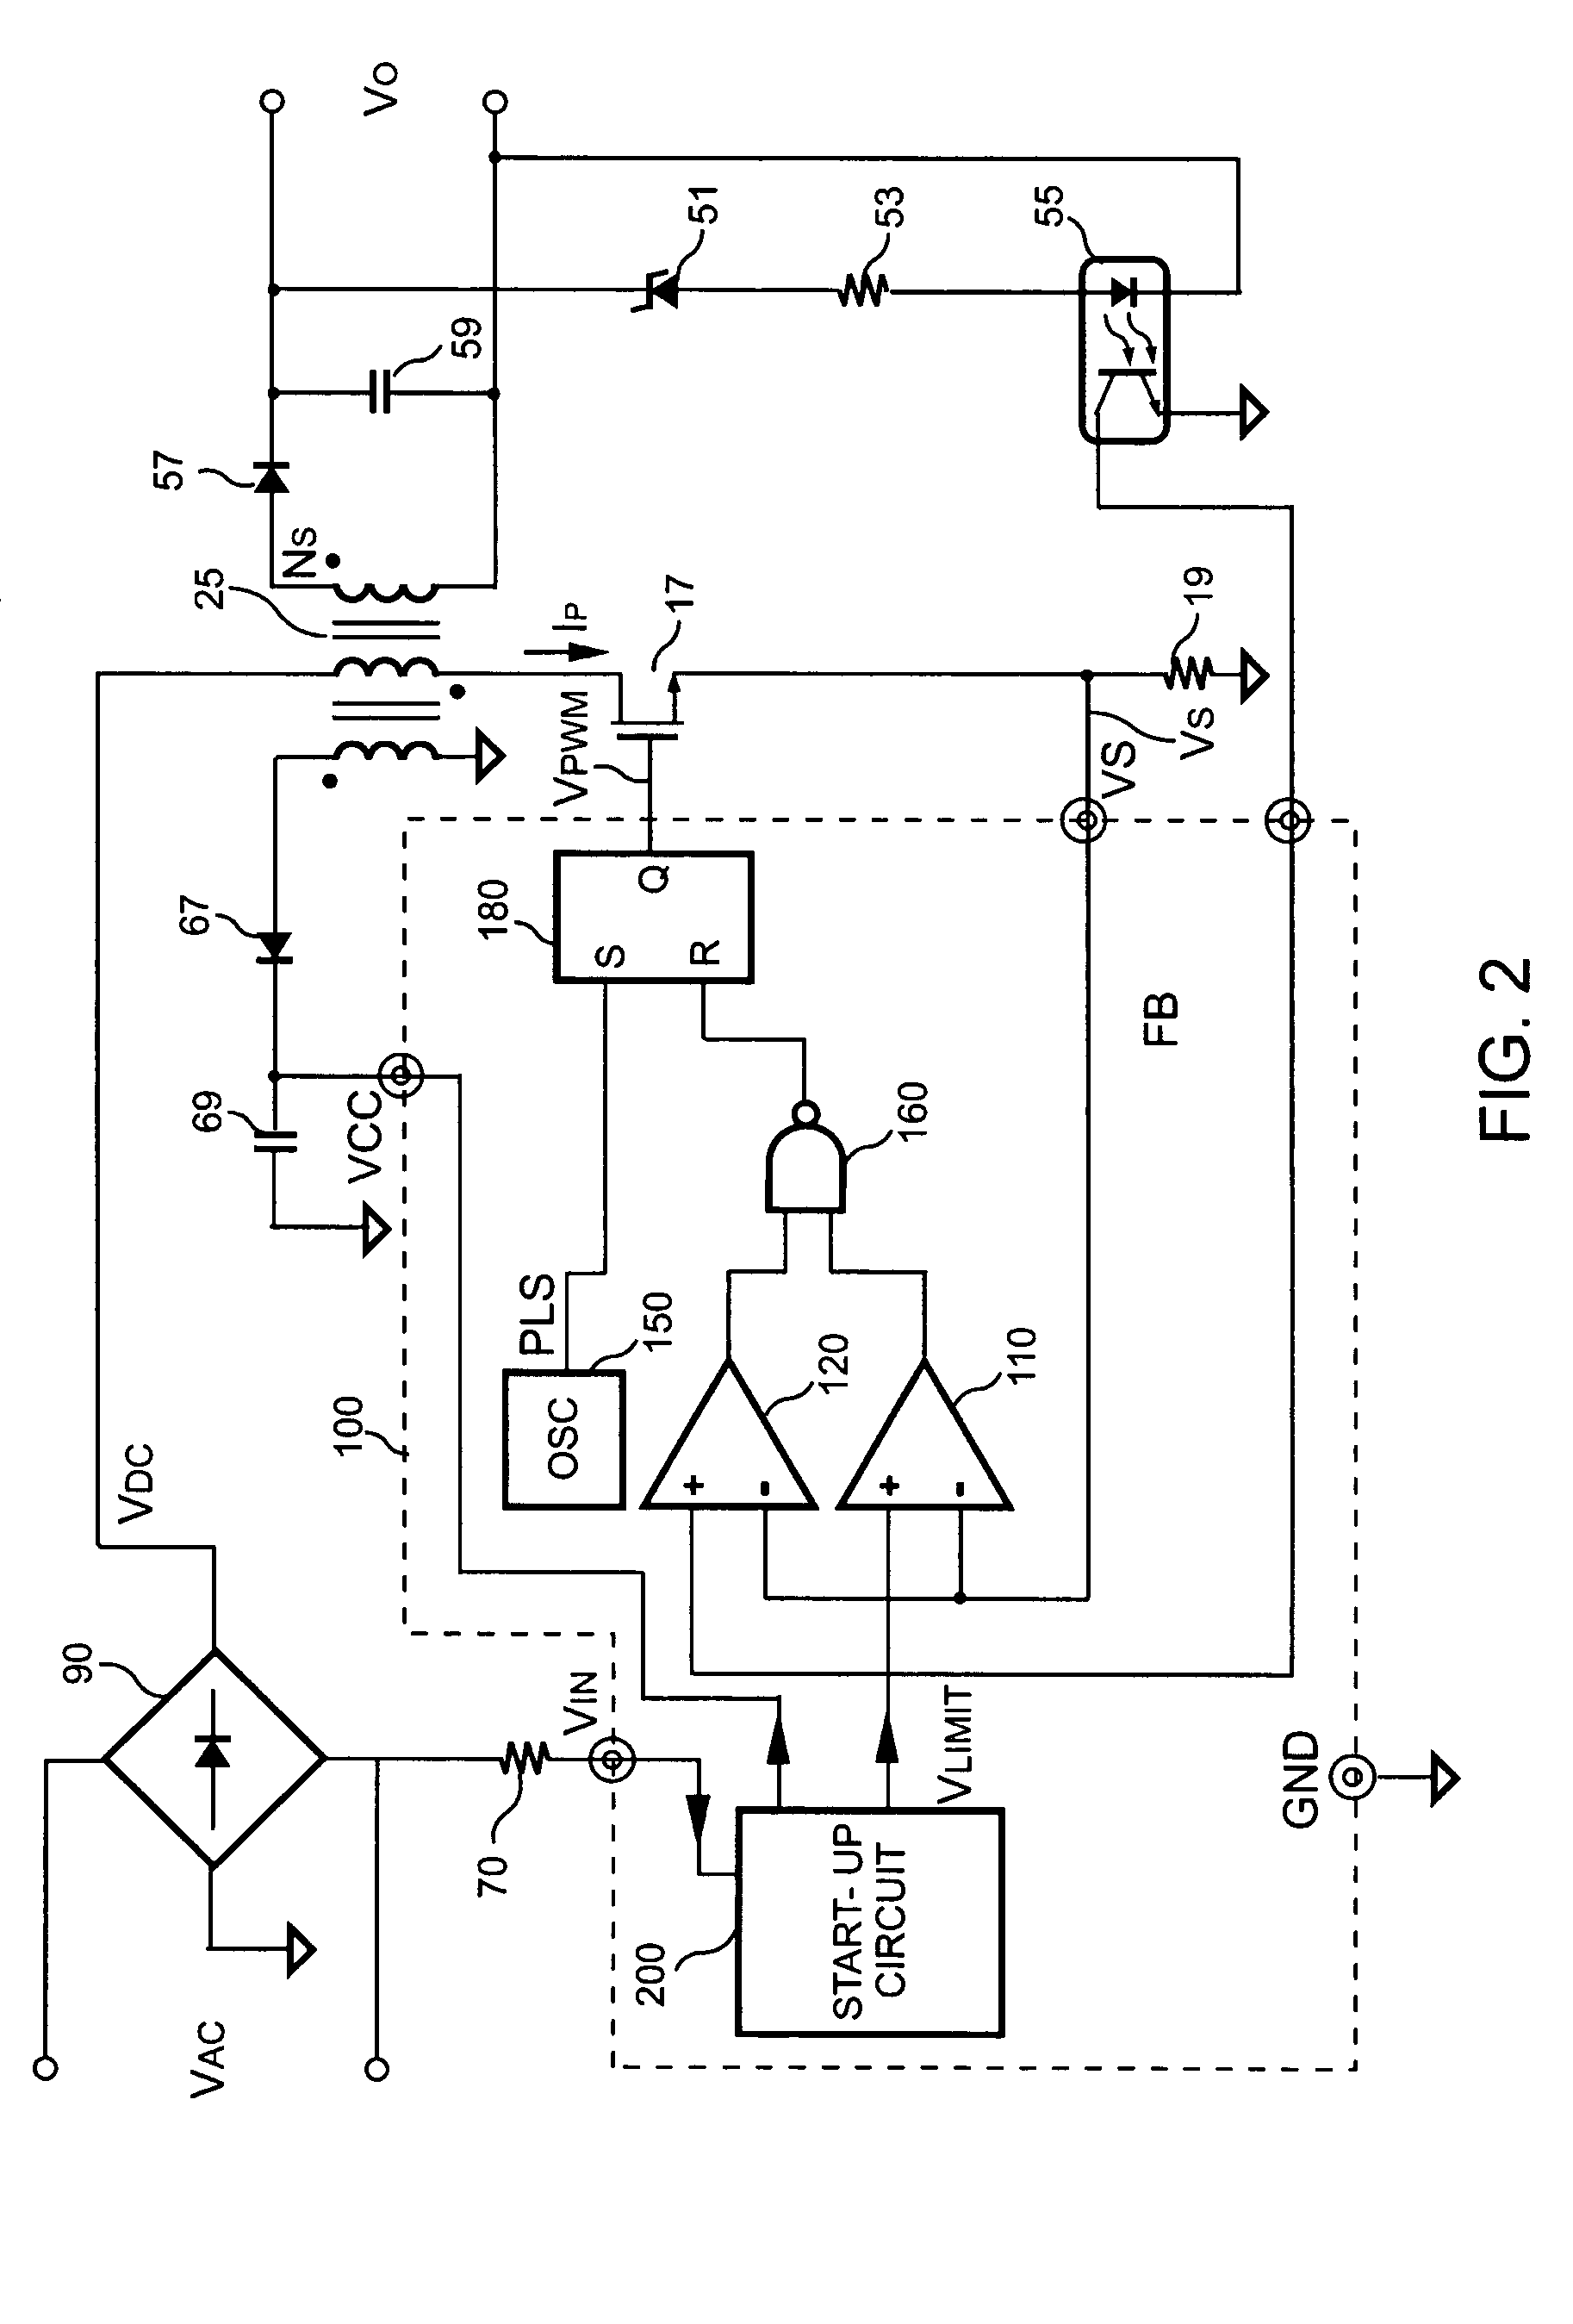 Start-up circuit with feedforward compensation for power converters